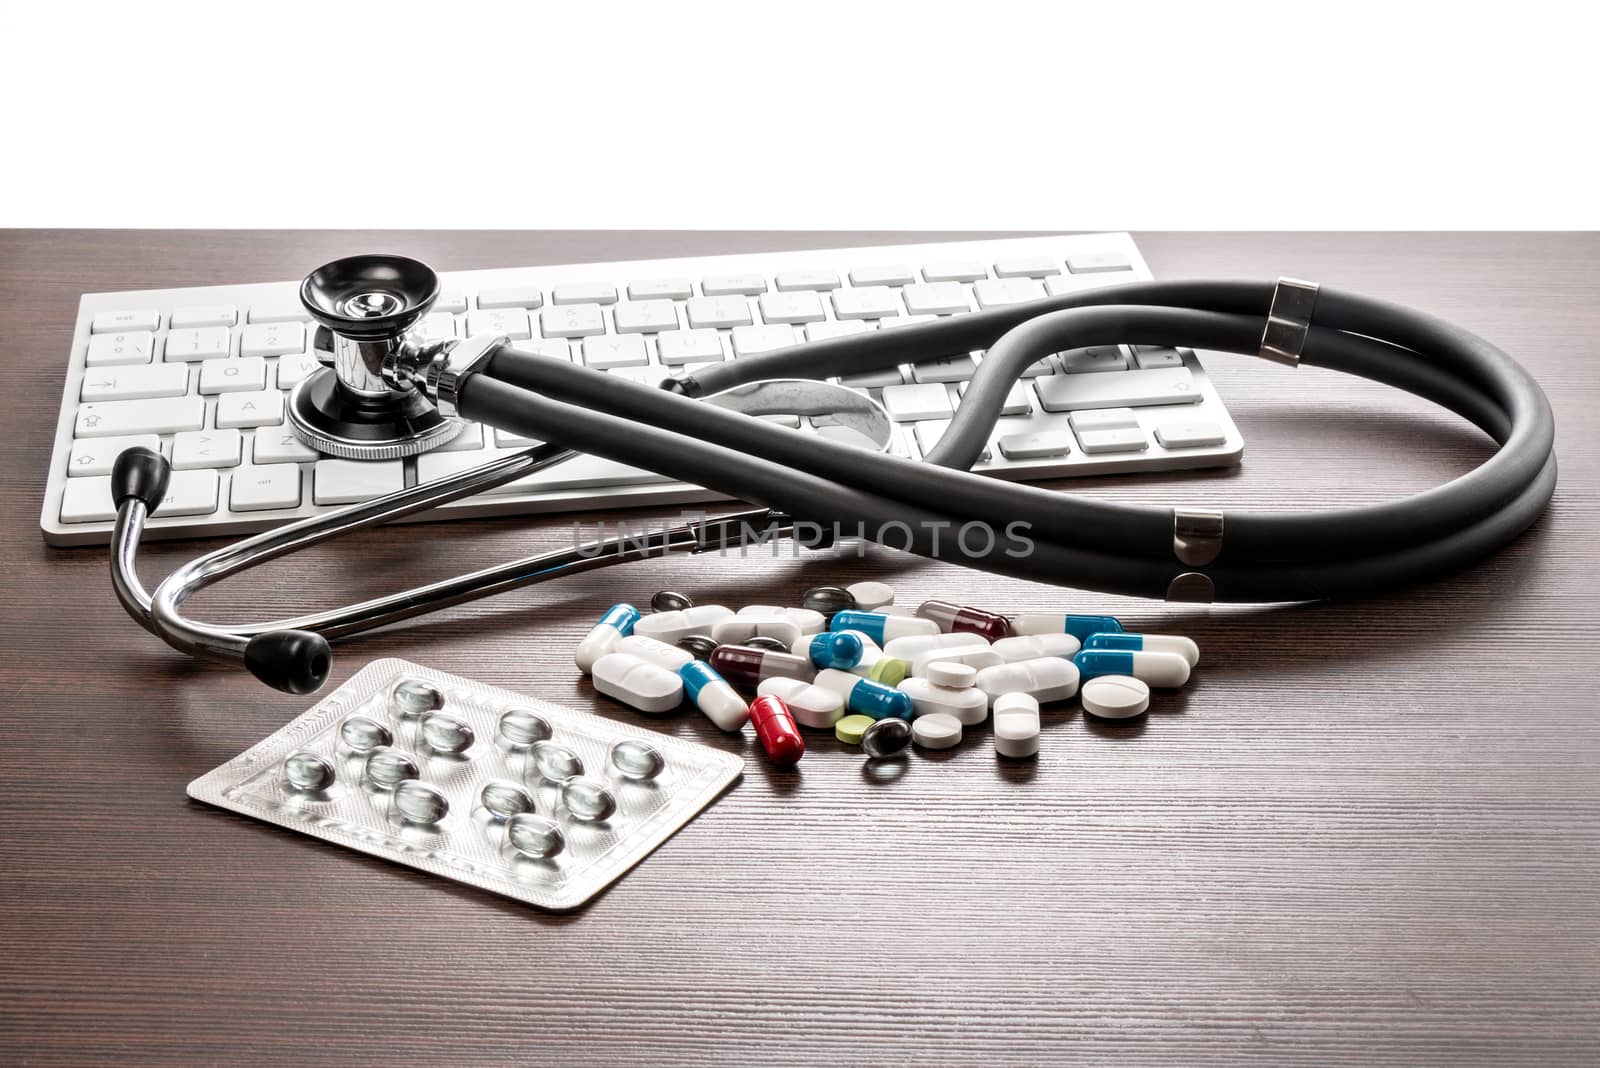 A Sthetoskop and medicines are on a brown desk